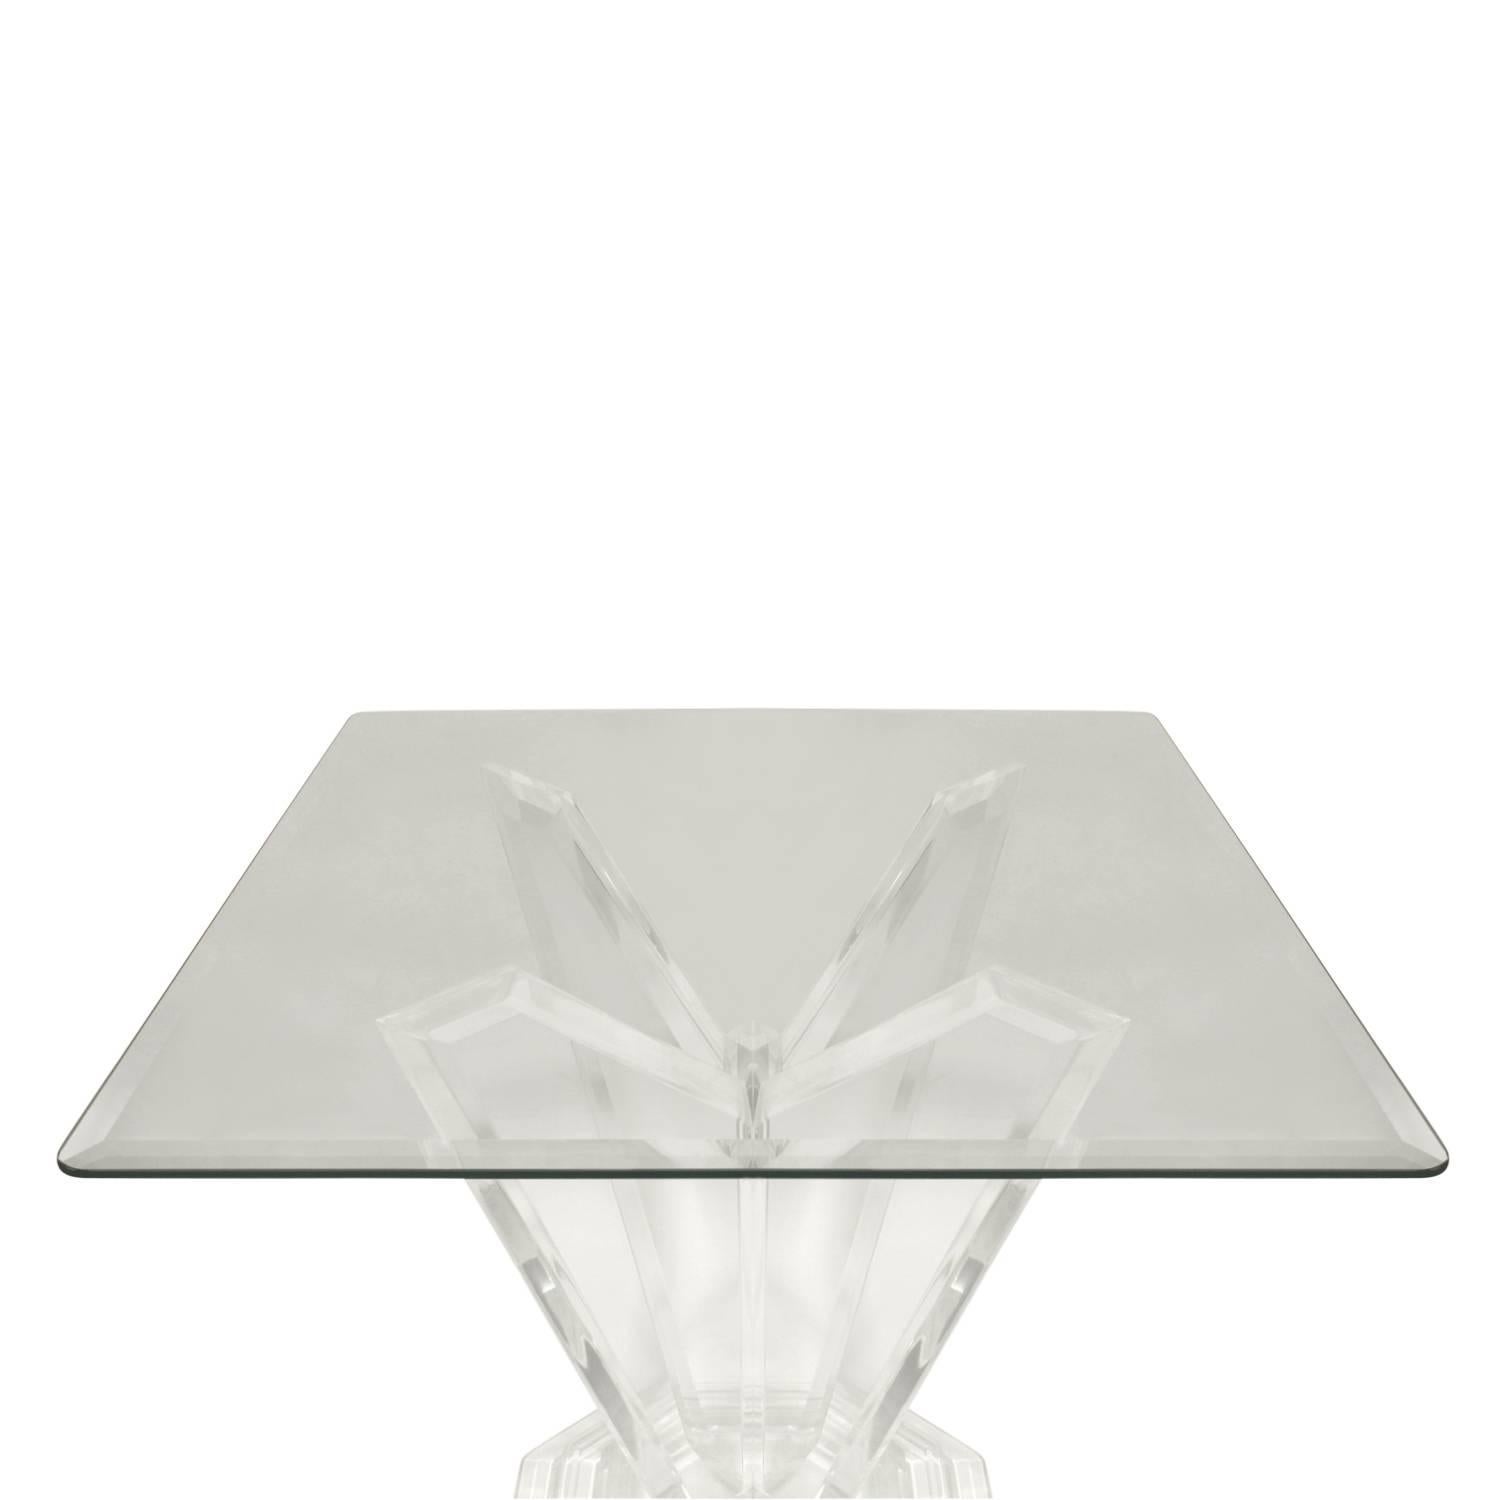 Sculptural side table with Lucite base and glass top, American, 1970s.